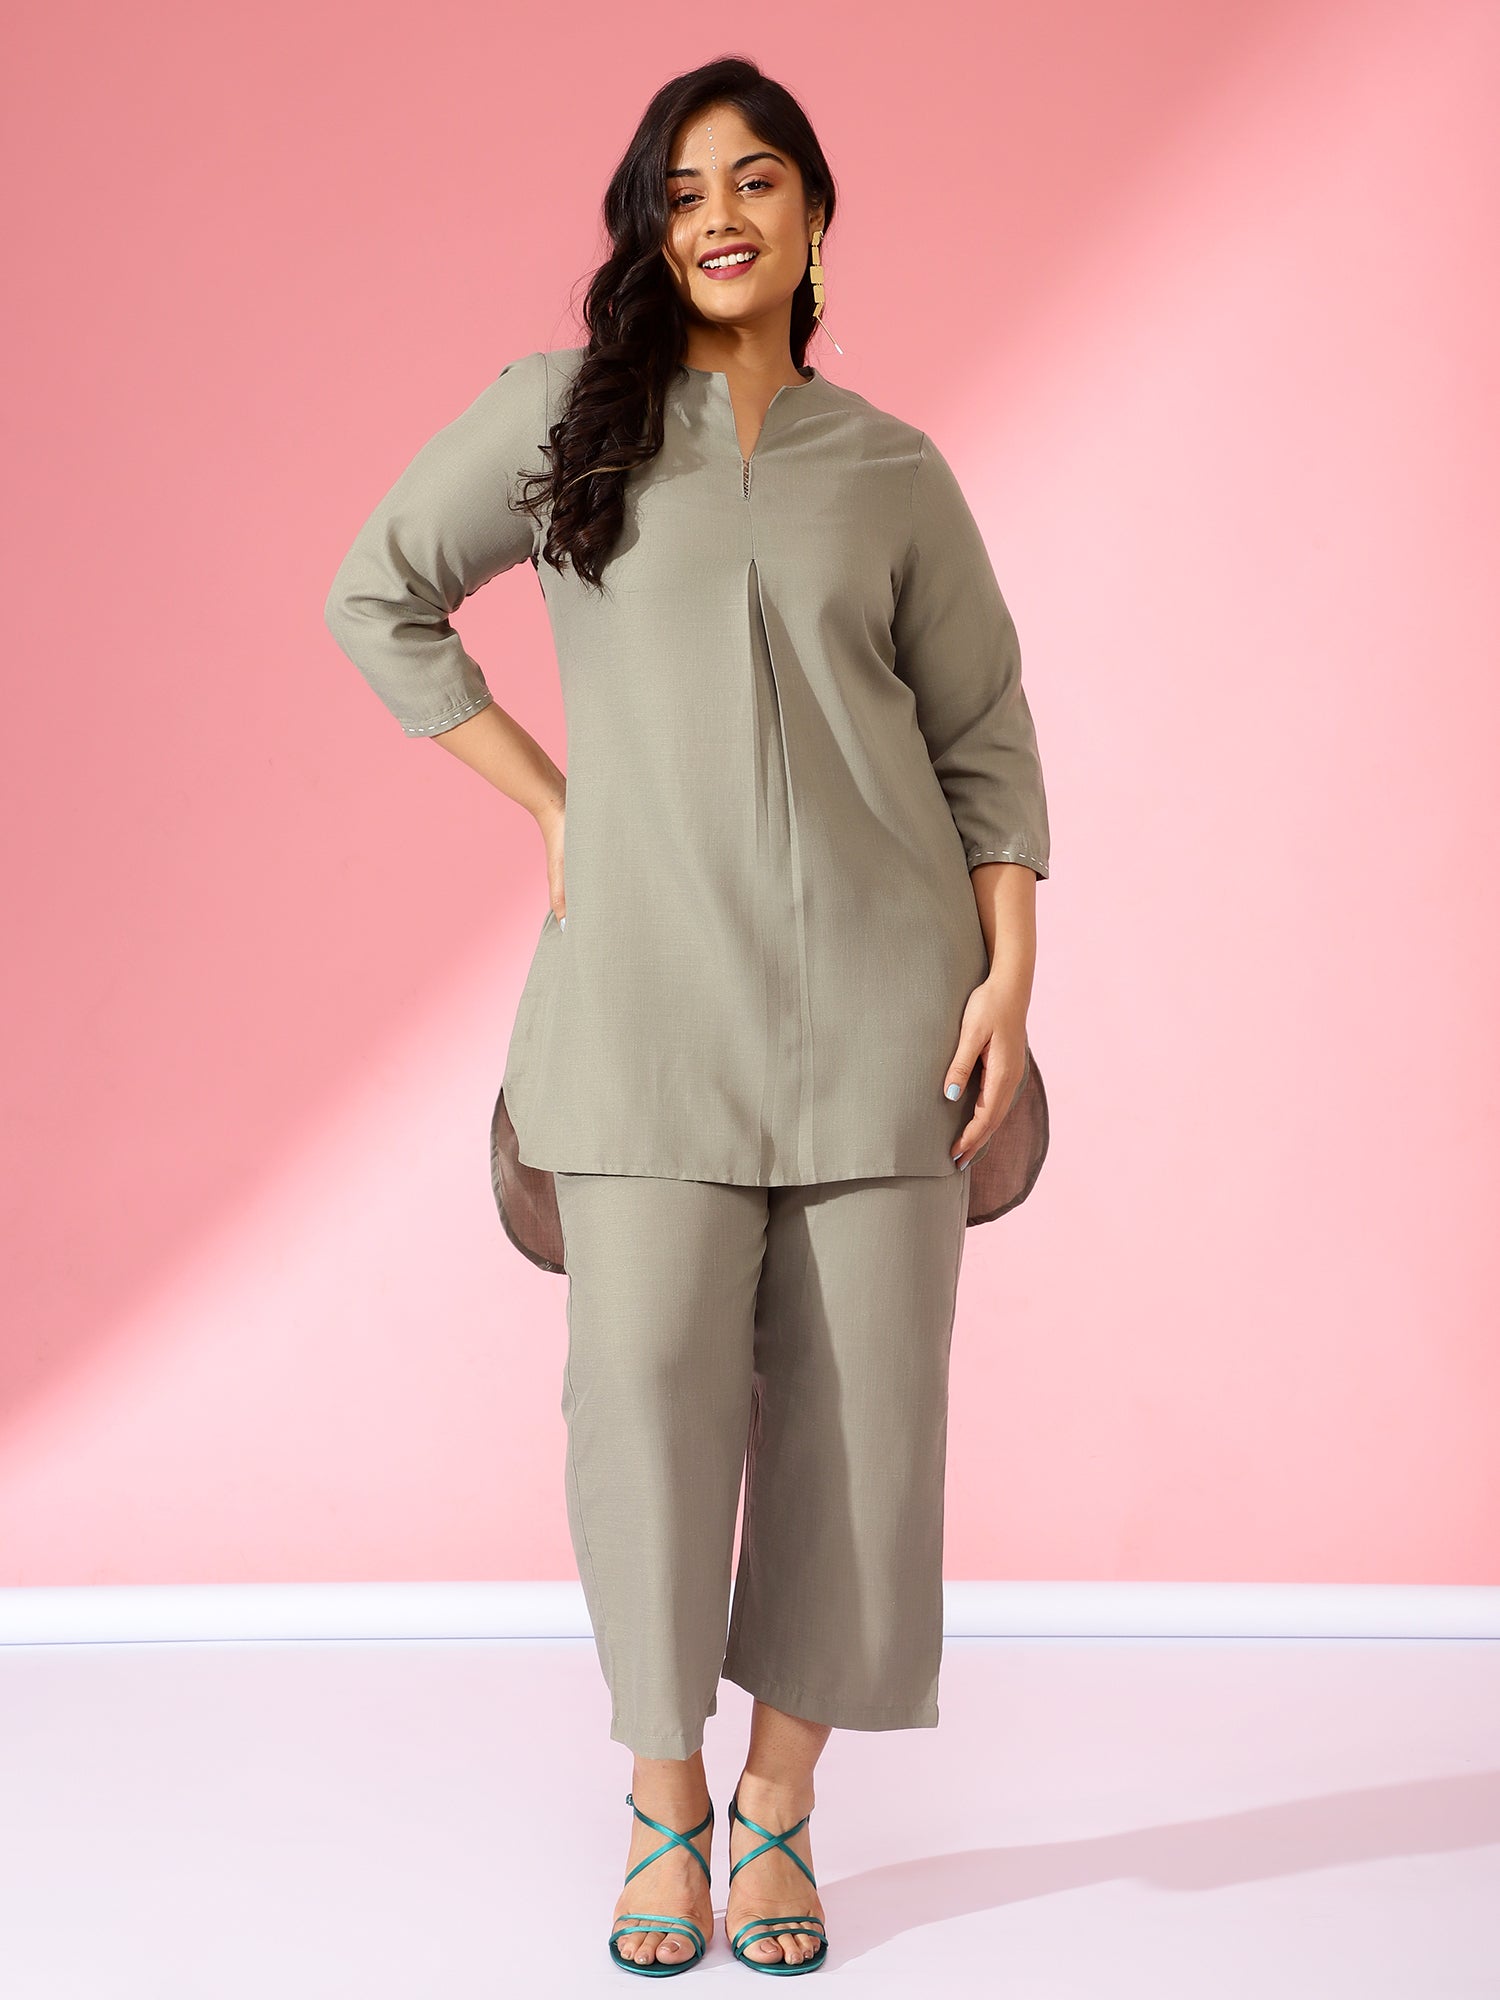 Plus Size Women Embroided Co-Ord Set Grey